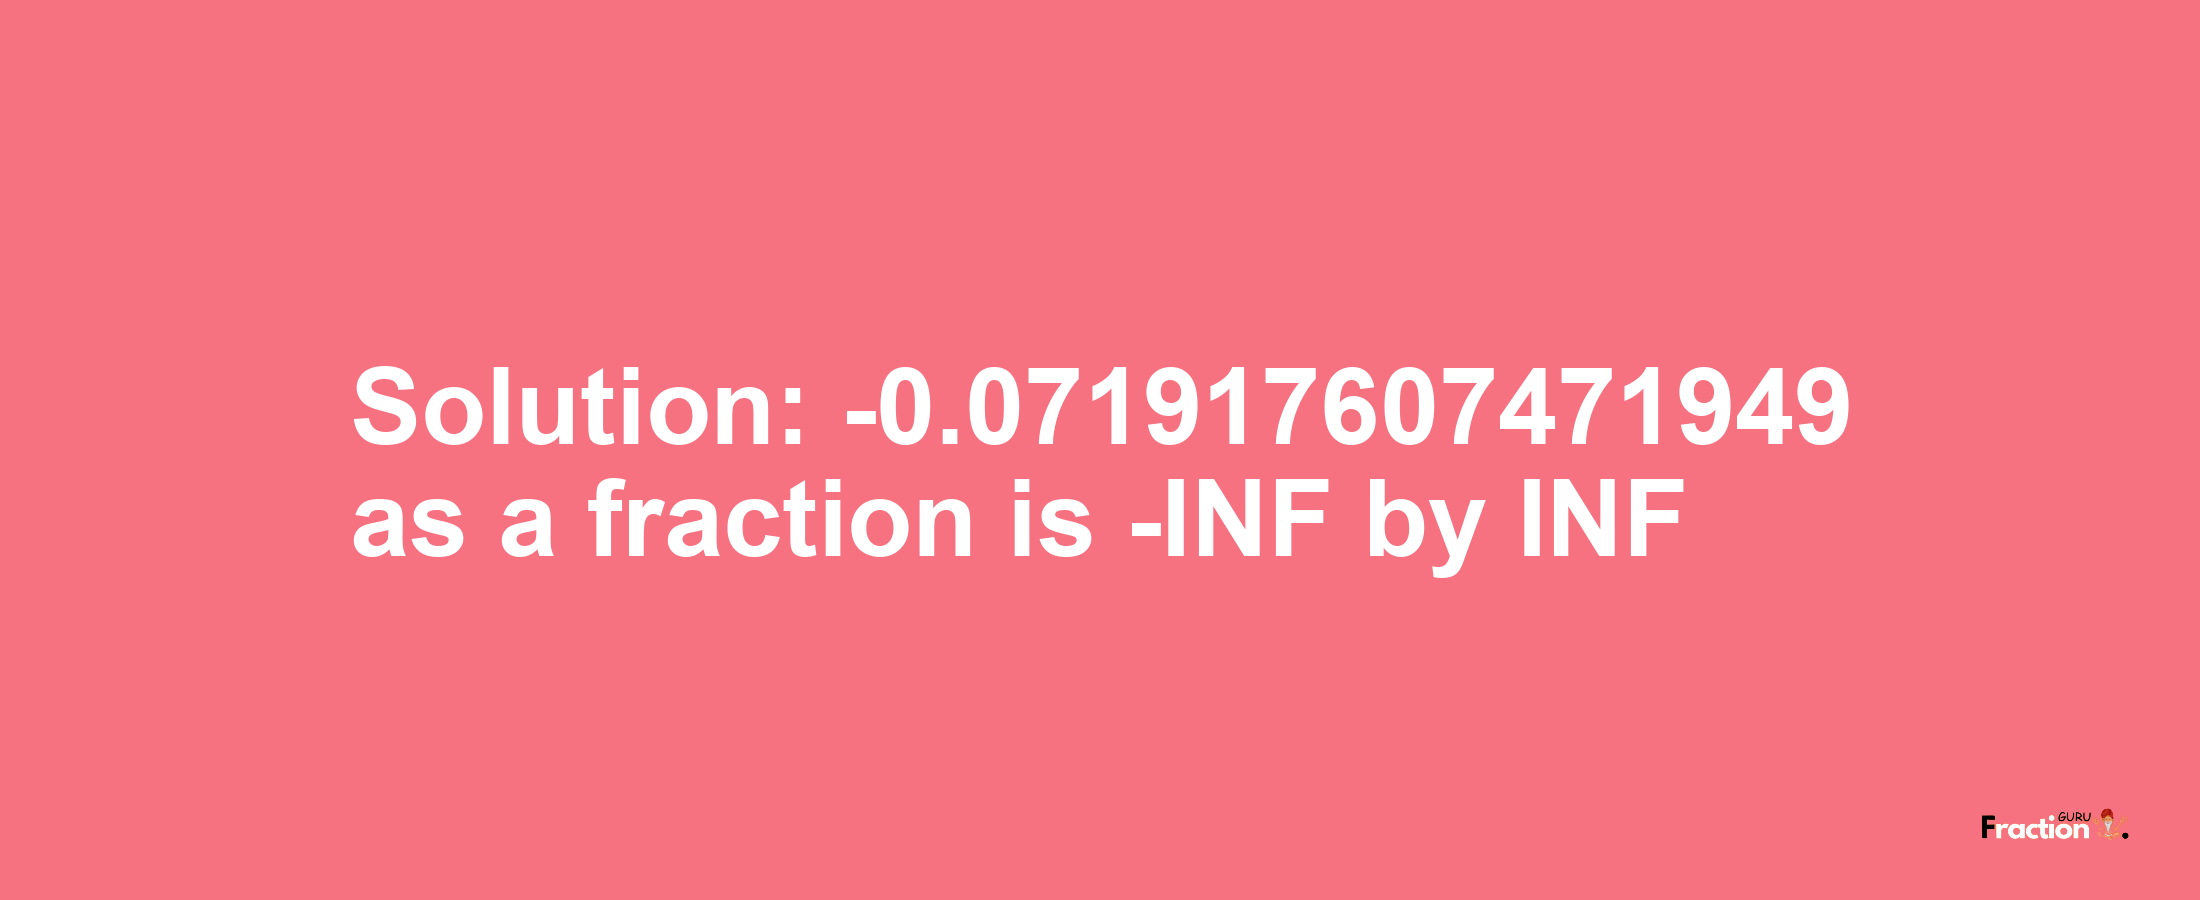 Solution:-0.071917607471949 as a fraction is -INF/INF